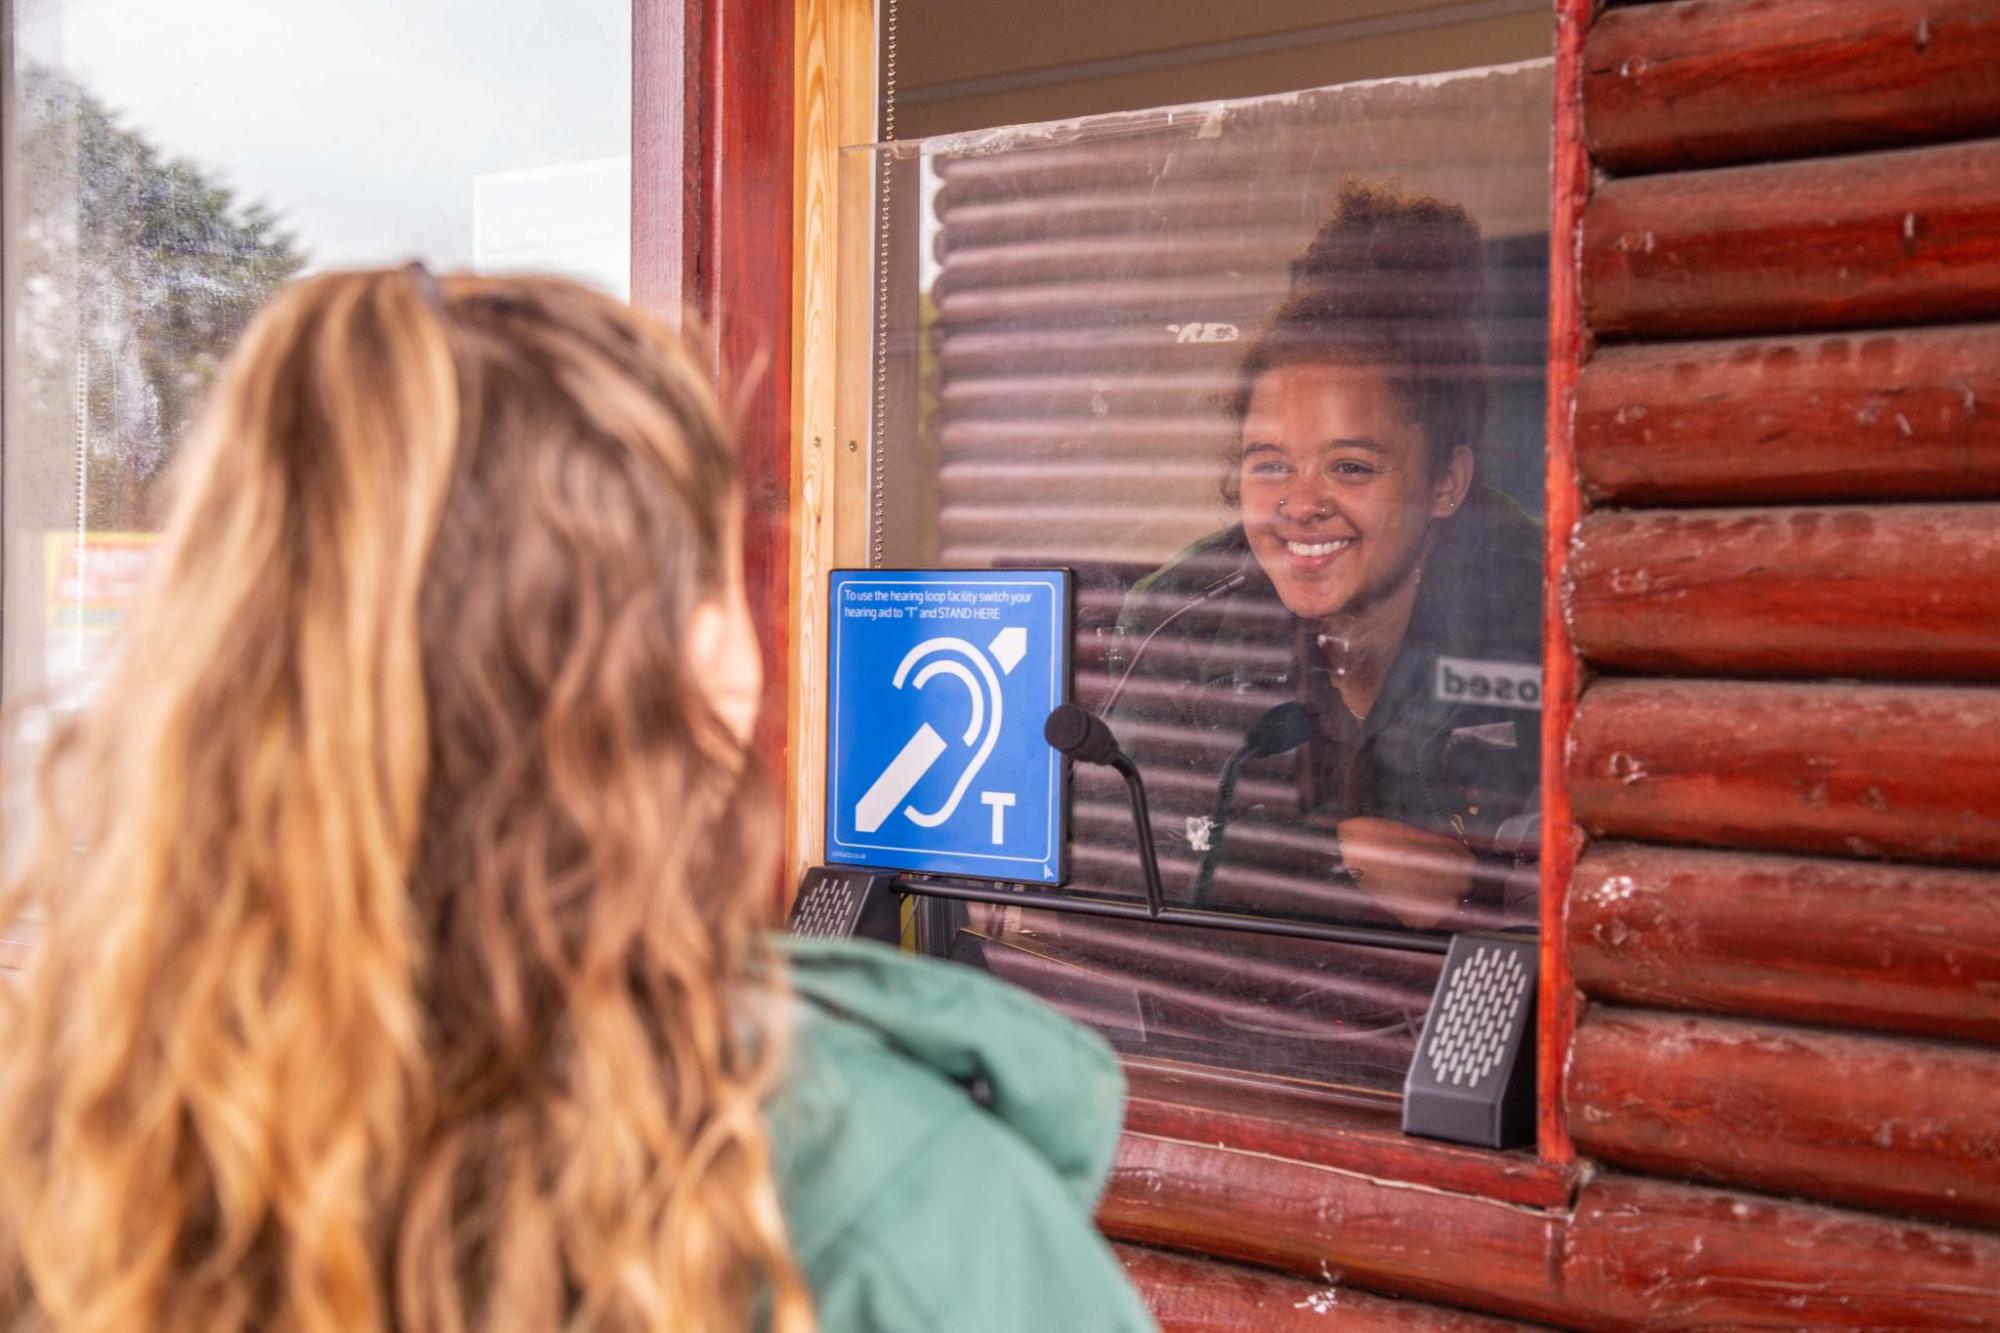 Young girl at ticket hut, speaking with smiling staff member behind window with blue hearing sticker visible